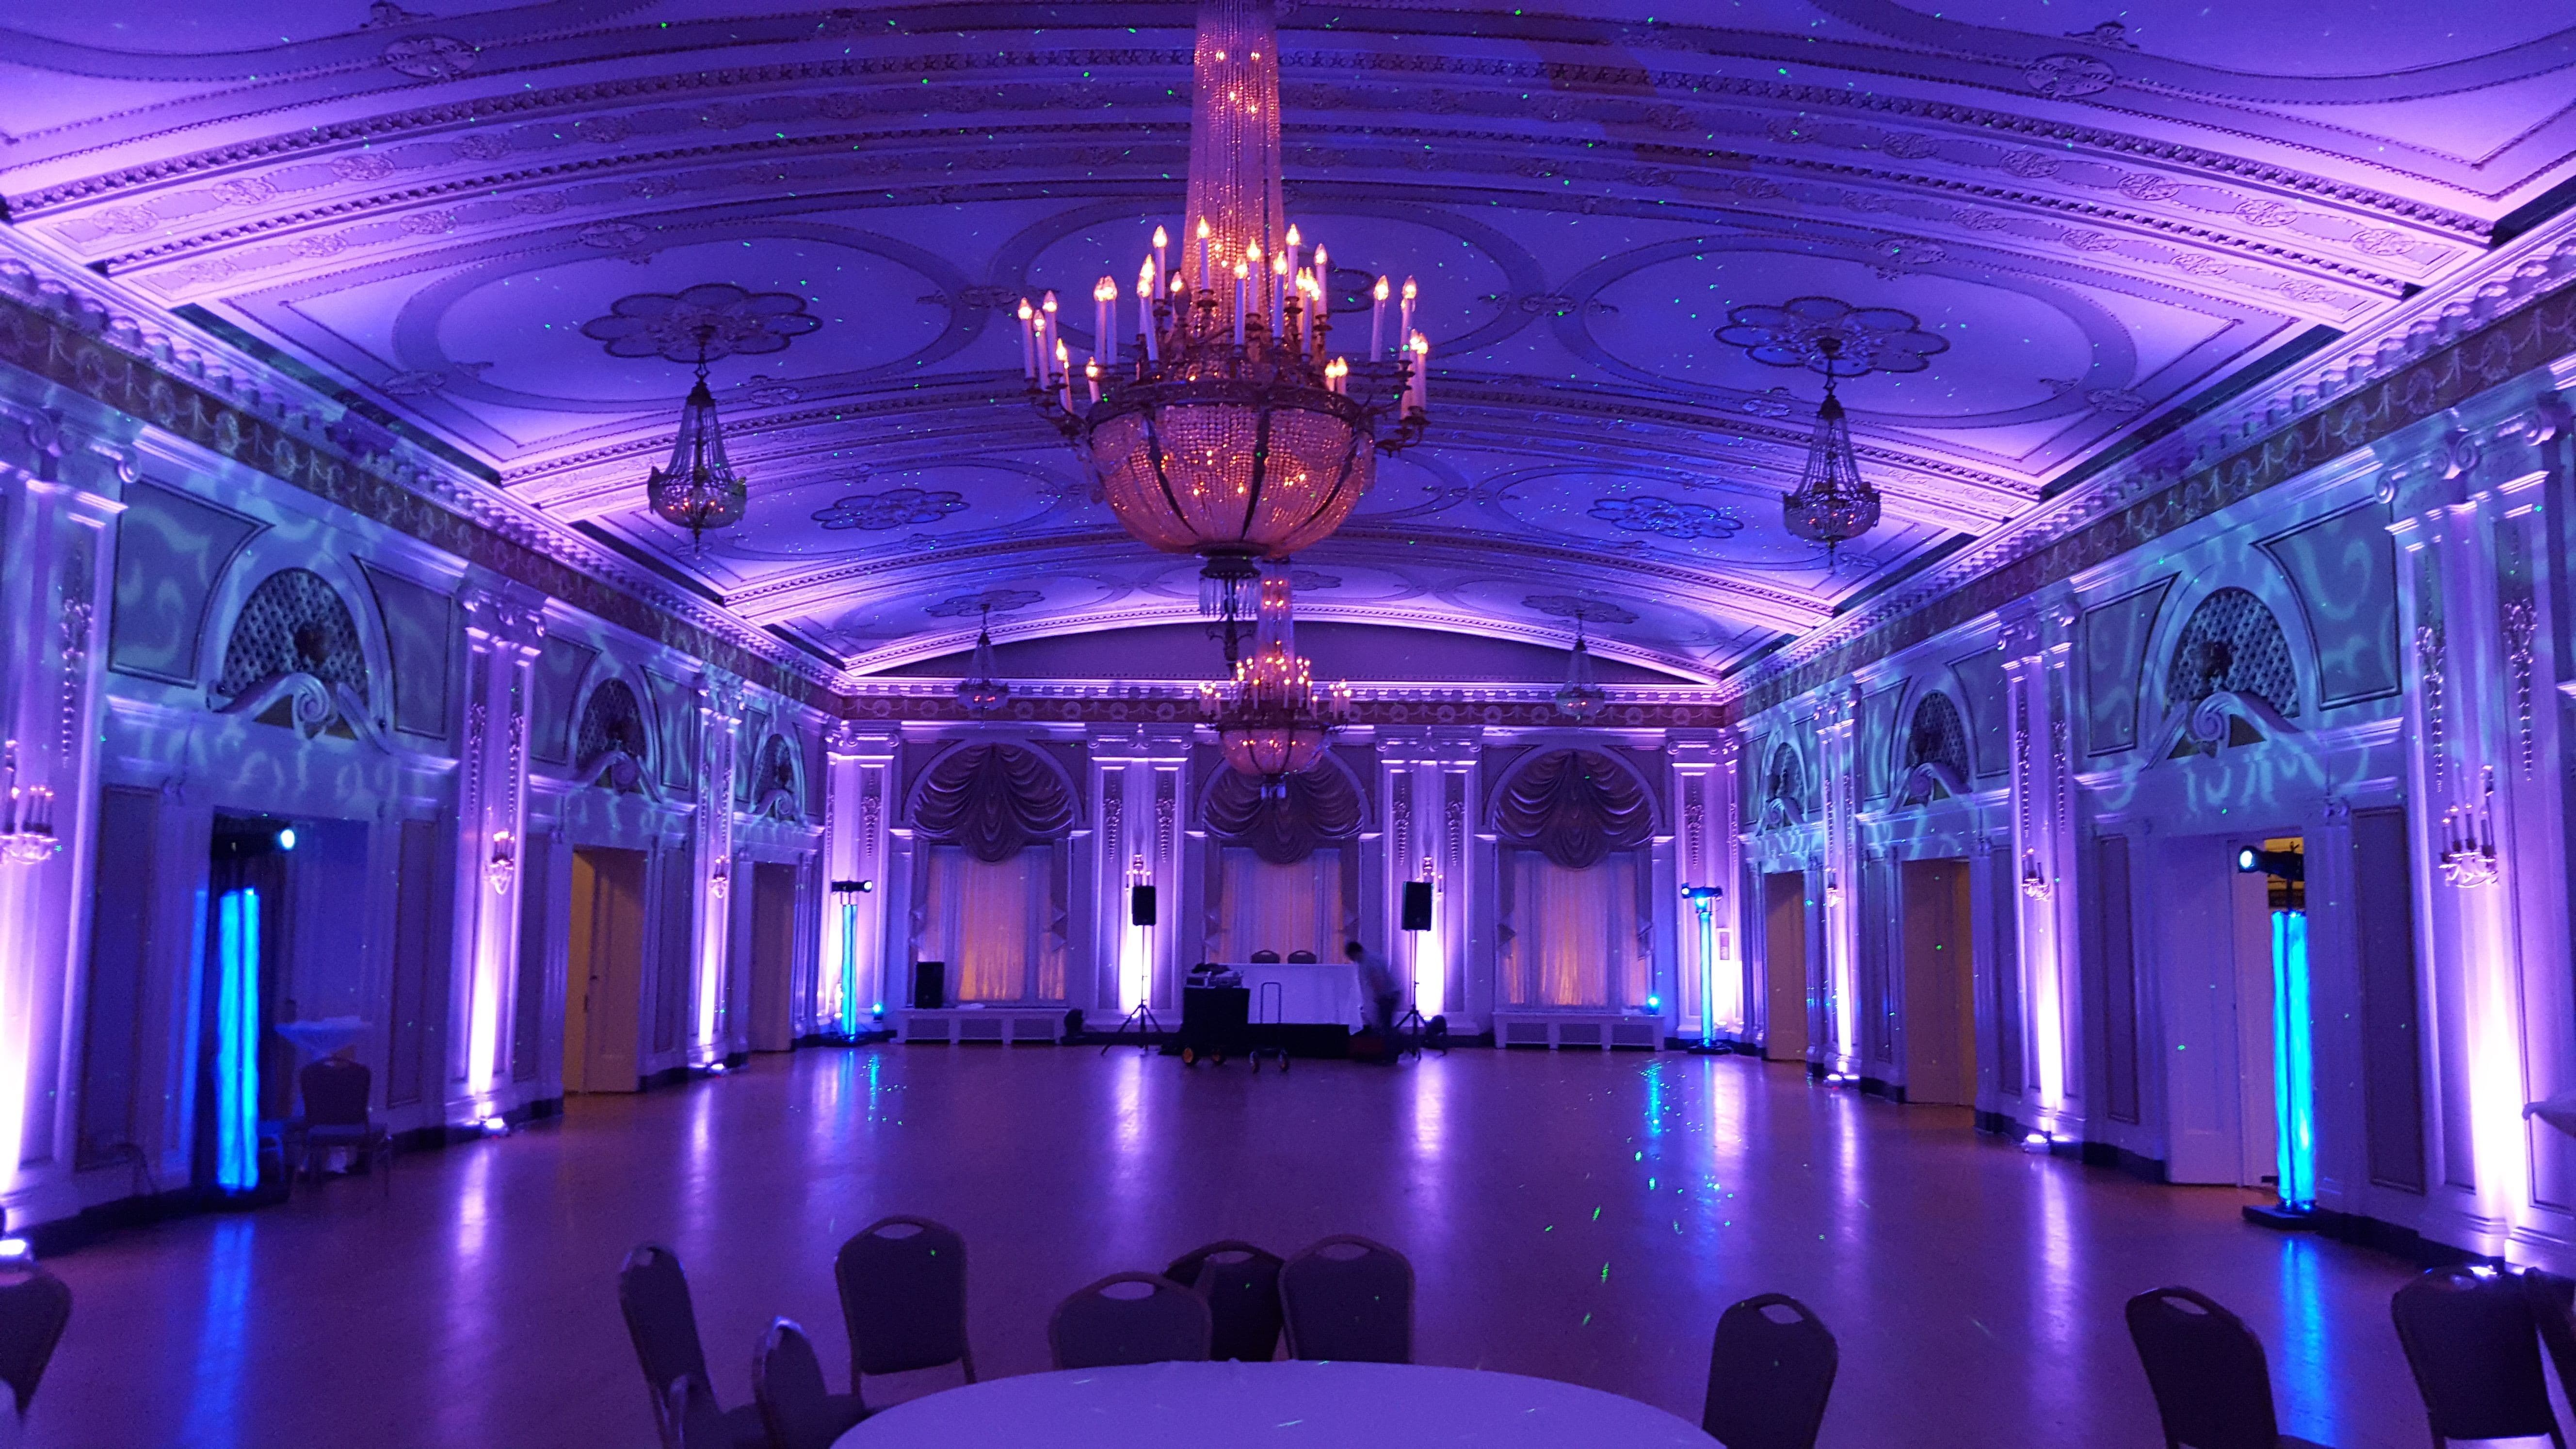 Wedding lighting at Greysolon Ballroom. Up lighting in lavender with stars and Northern Lights dancing on the ceiling.